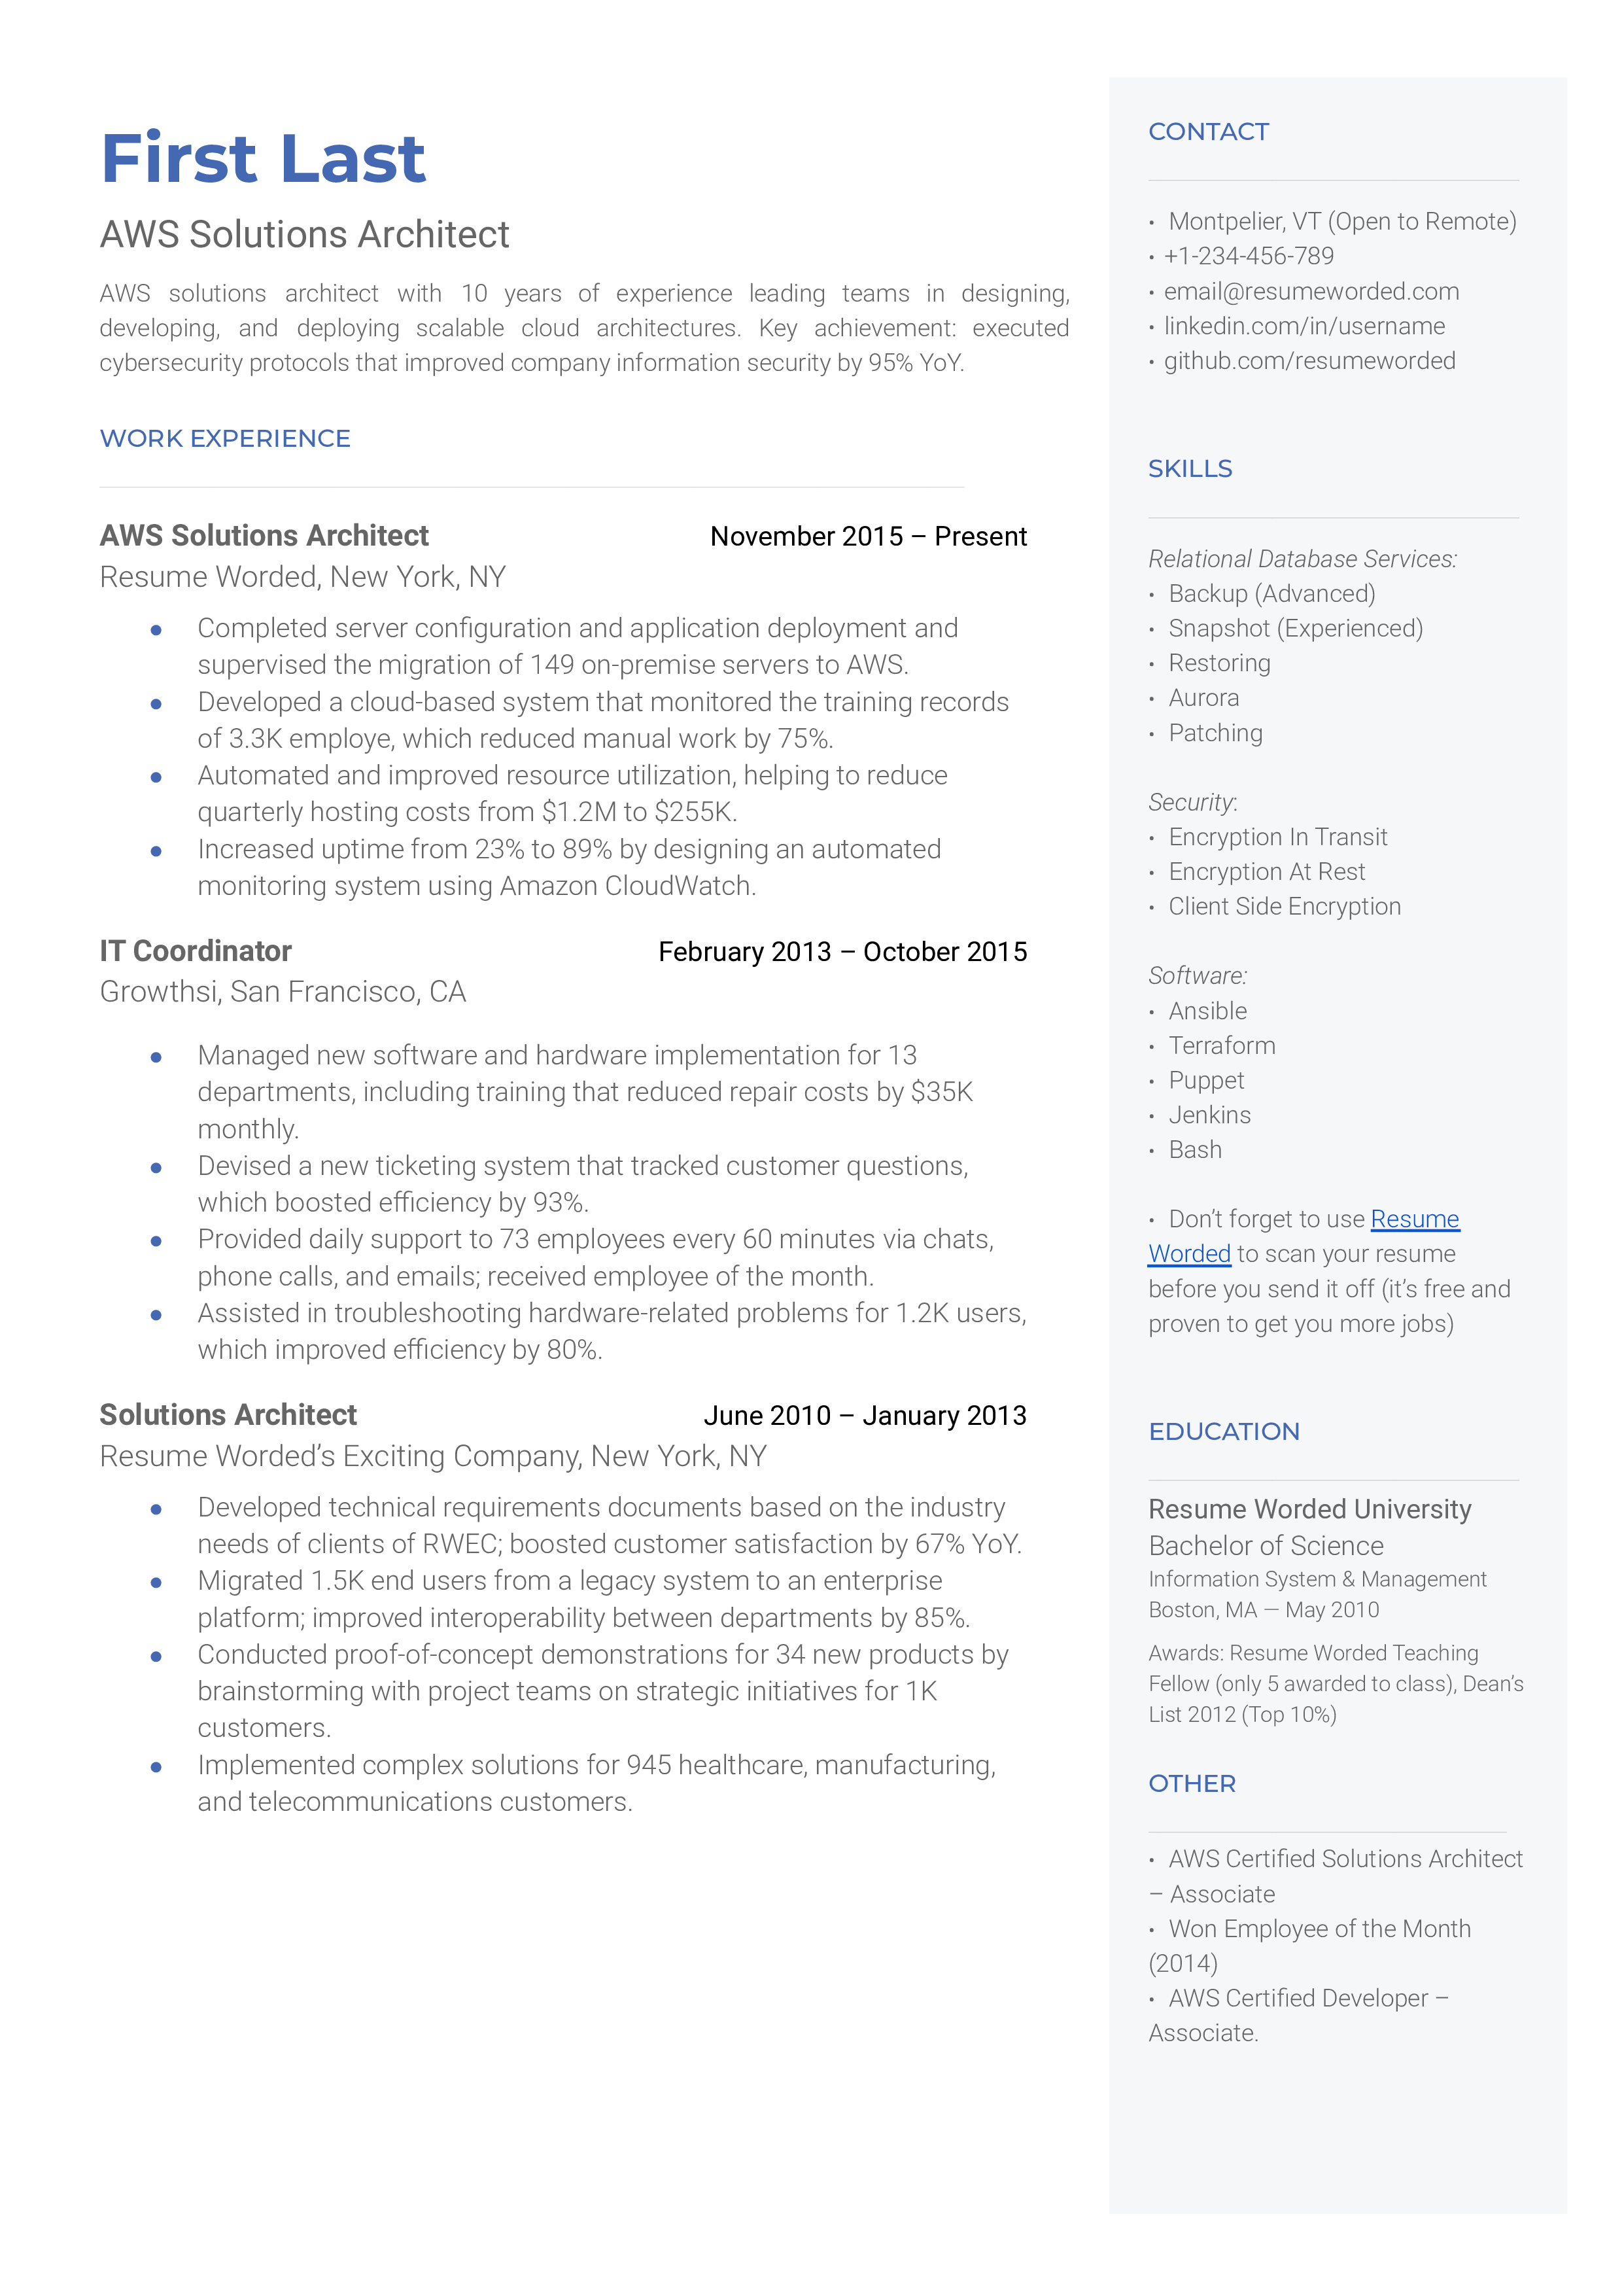 A CV for an AWS Solutions Architect showcasing their technical proficiency and problem-solving skills.